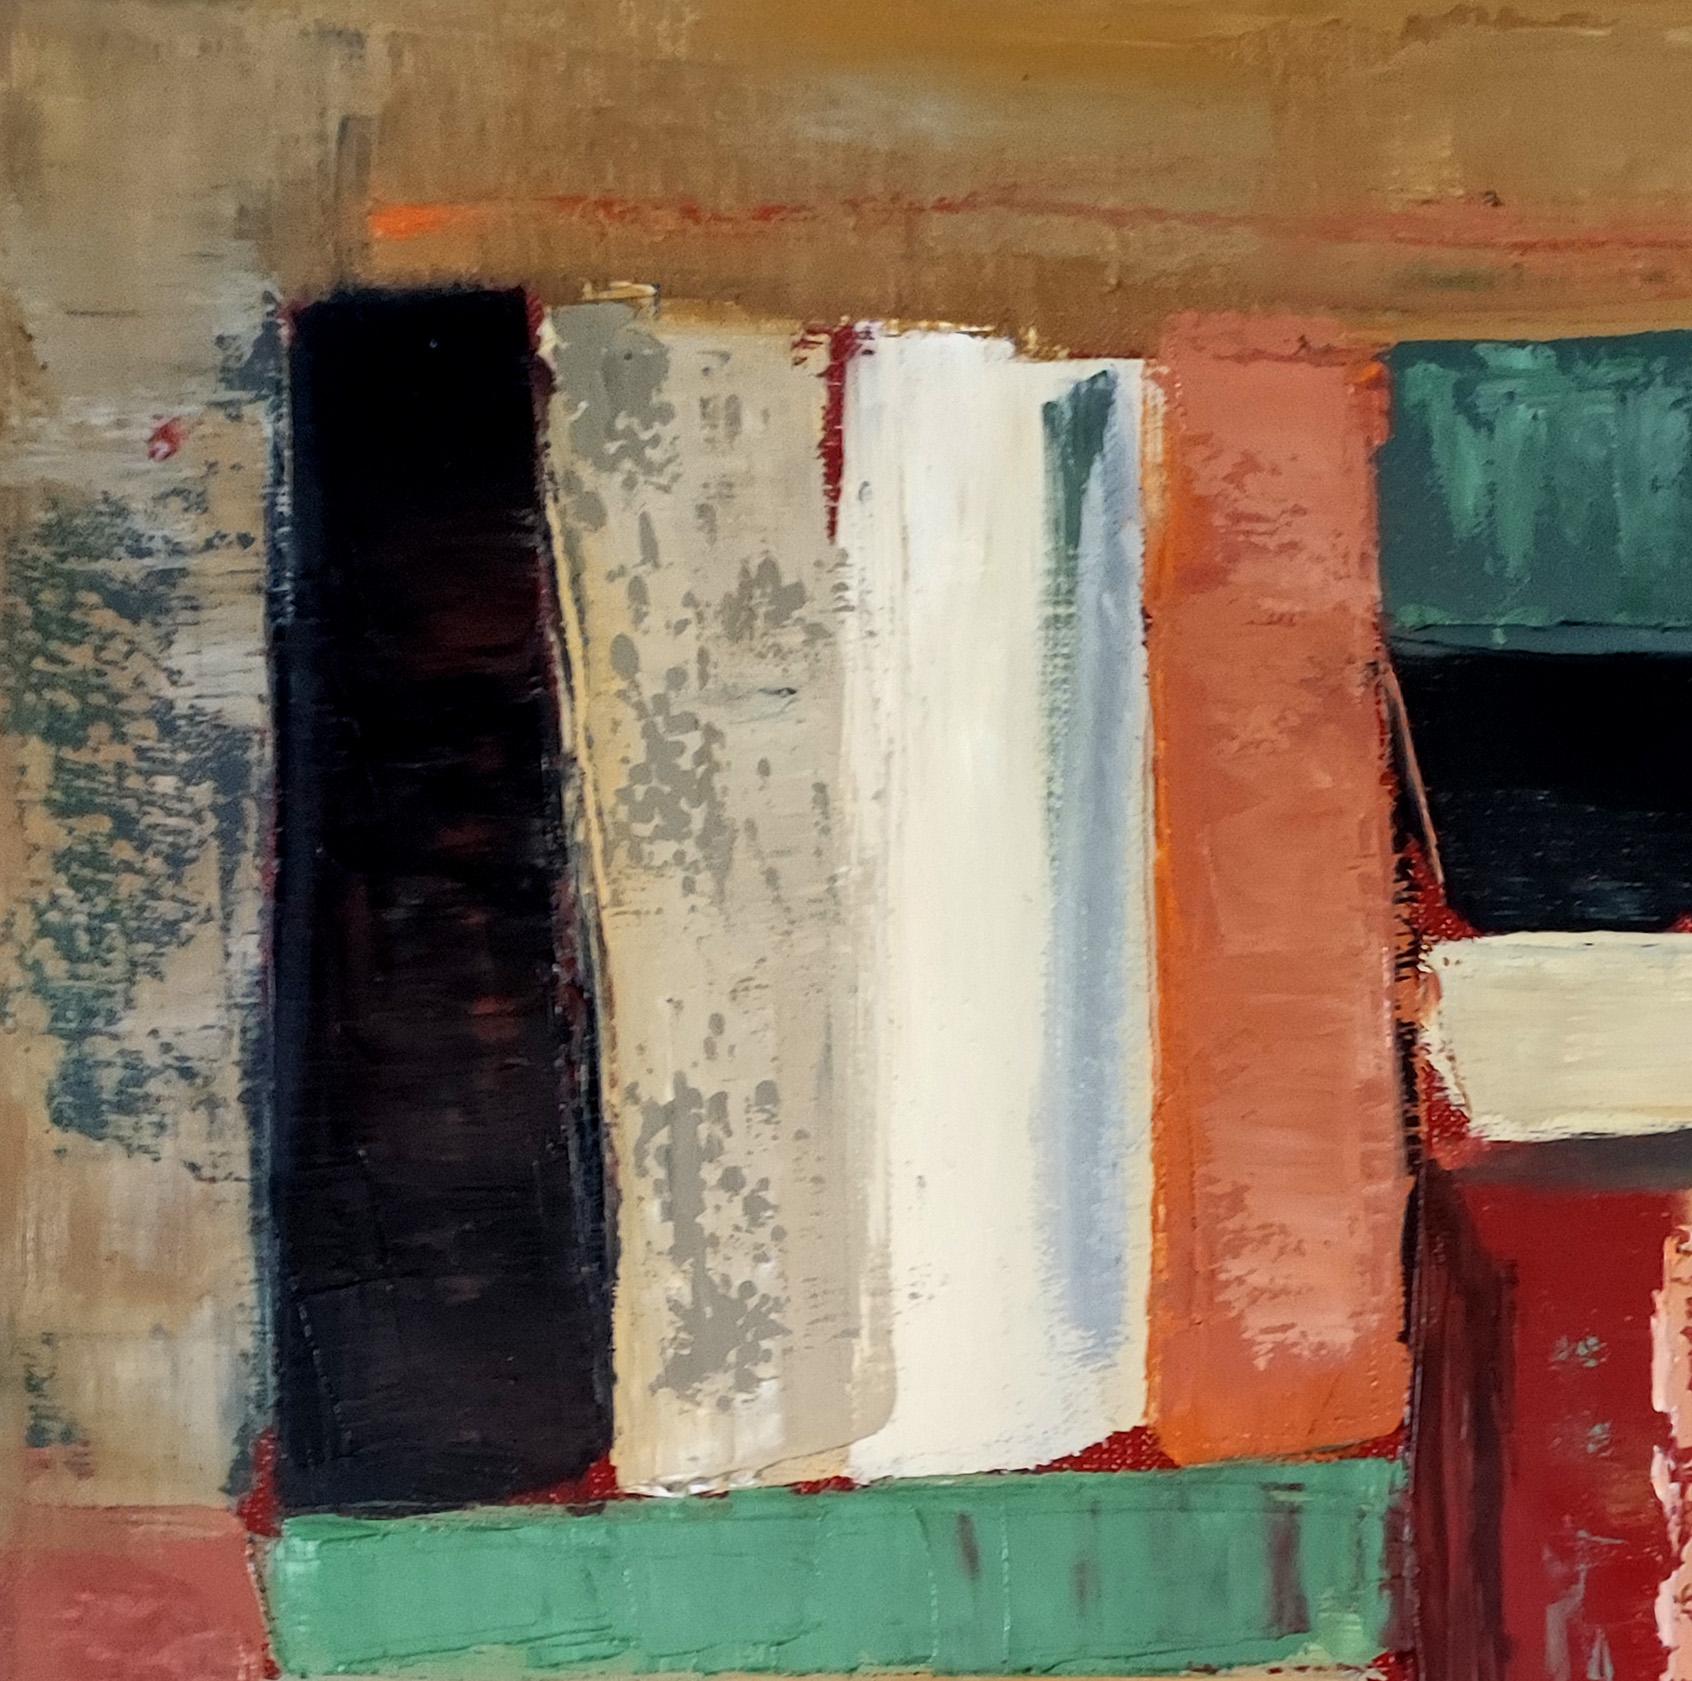 chromatic, colored abstract, books, oil on canvas, expressionism, geometric  - Abstract Geometric Painting by SOPHIE DUMONT